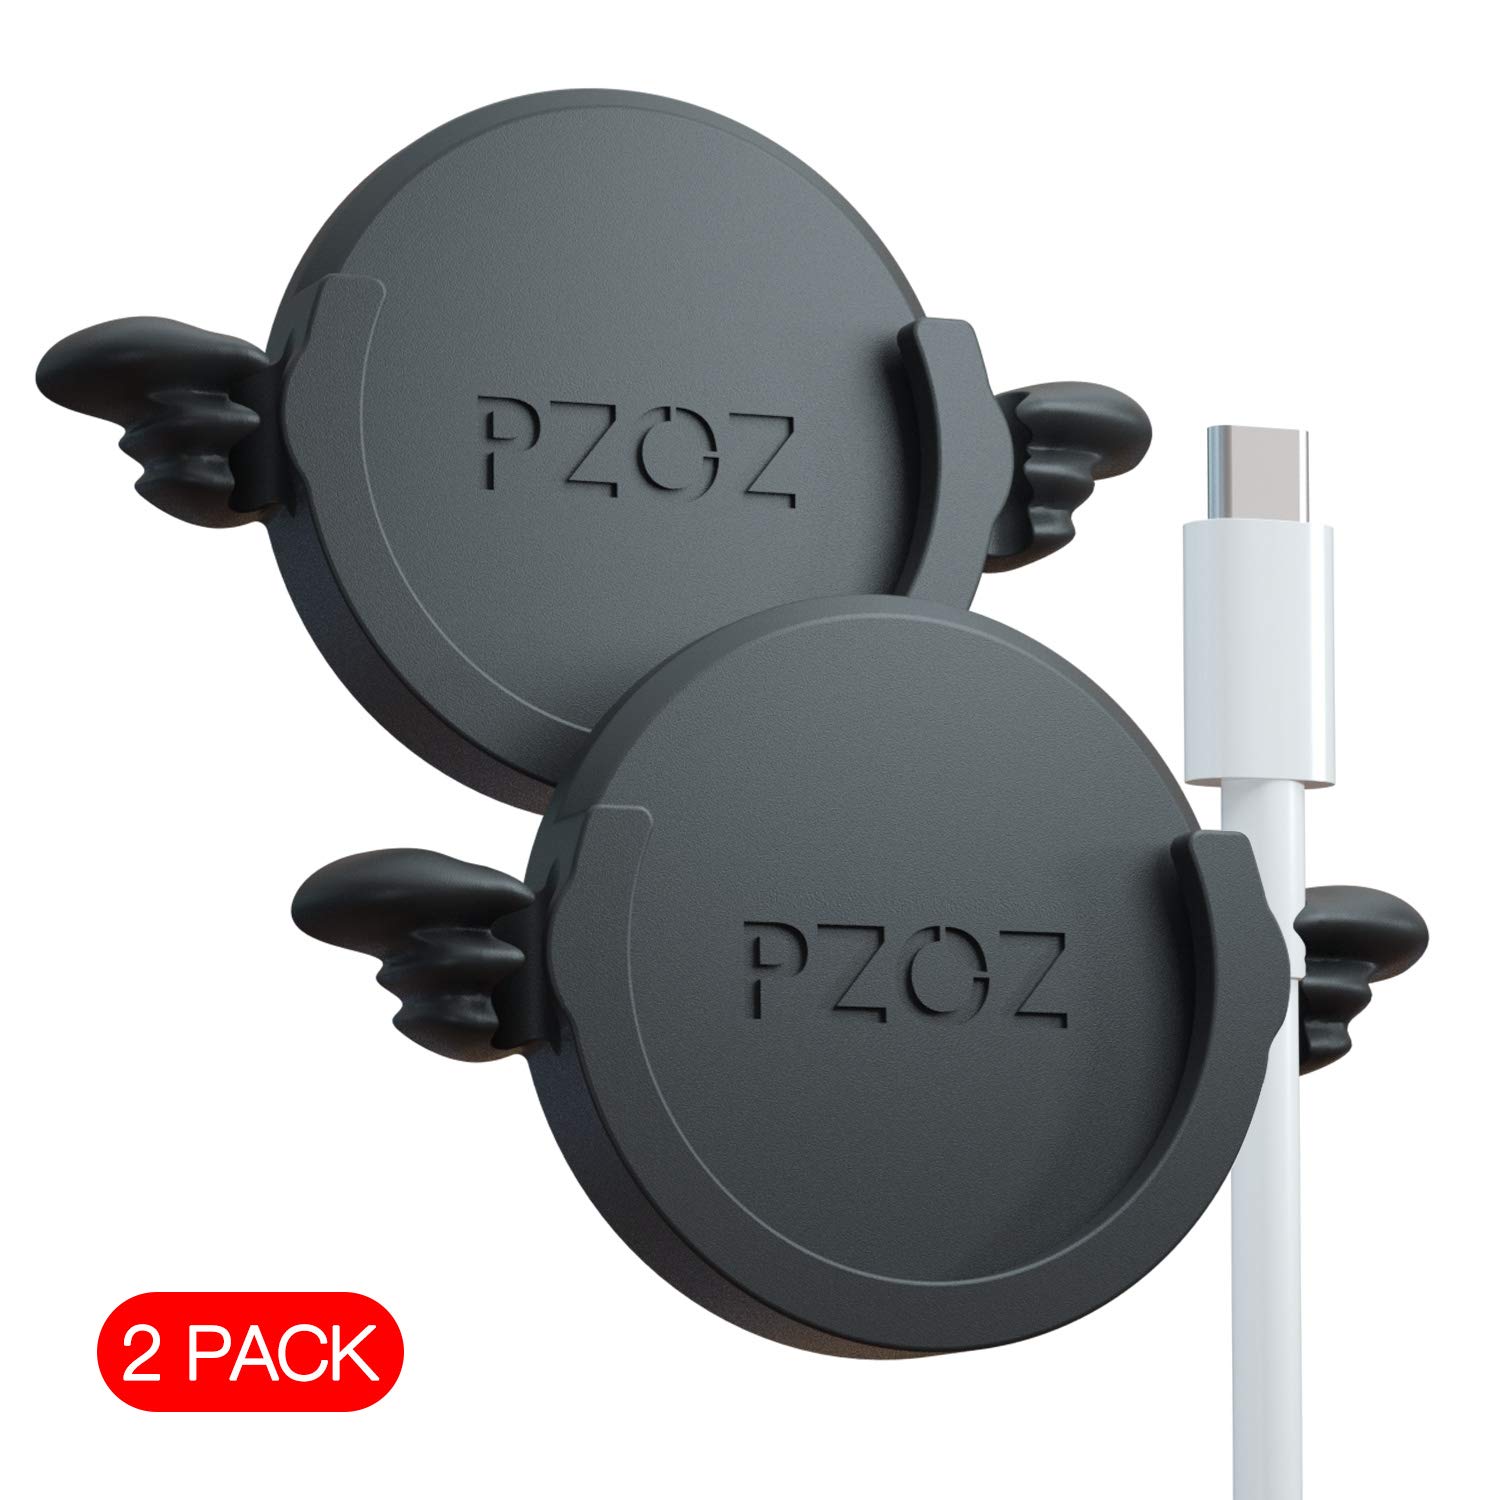 Book Cover pzoz Phone Car Mount Compatible for Collapsible Grip Socket, 2 Pack Adhesive Silicone Stand for Mount Charging Cable Holder Wire Clip Cord Organizer for Car, Office, Kitchen, Wall (Black)